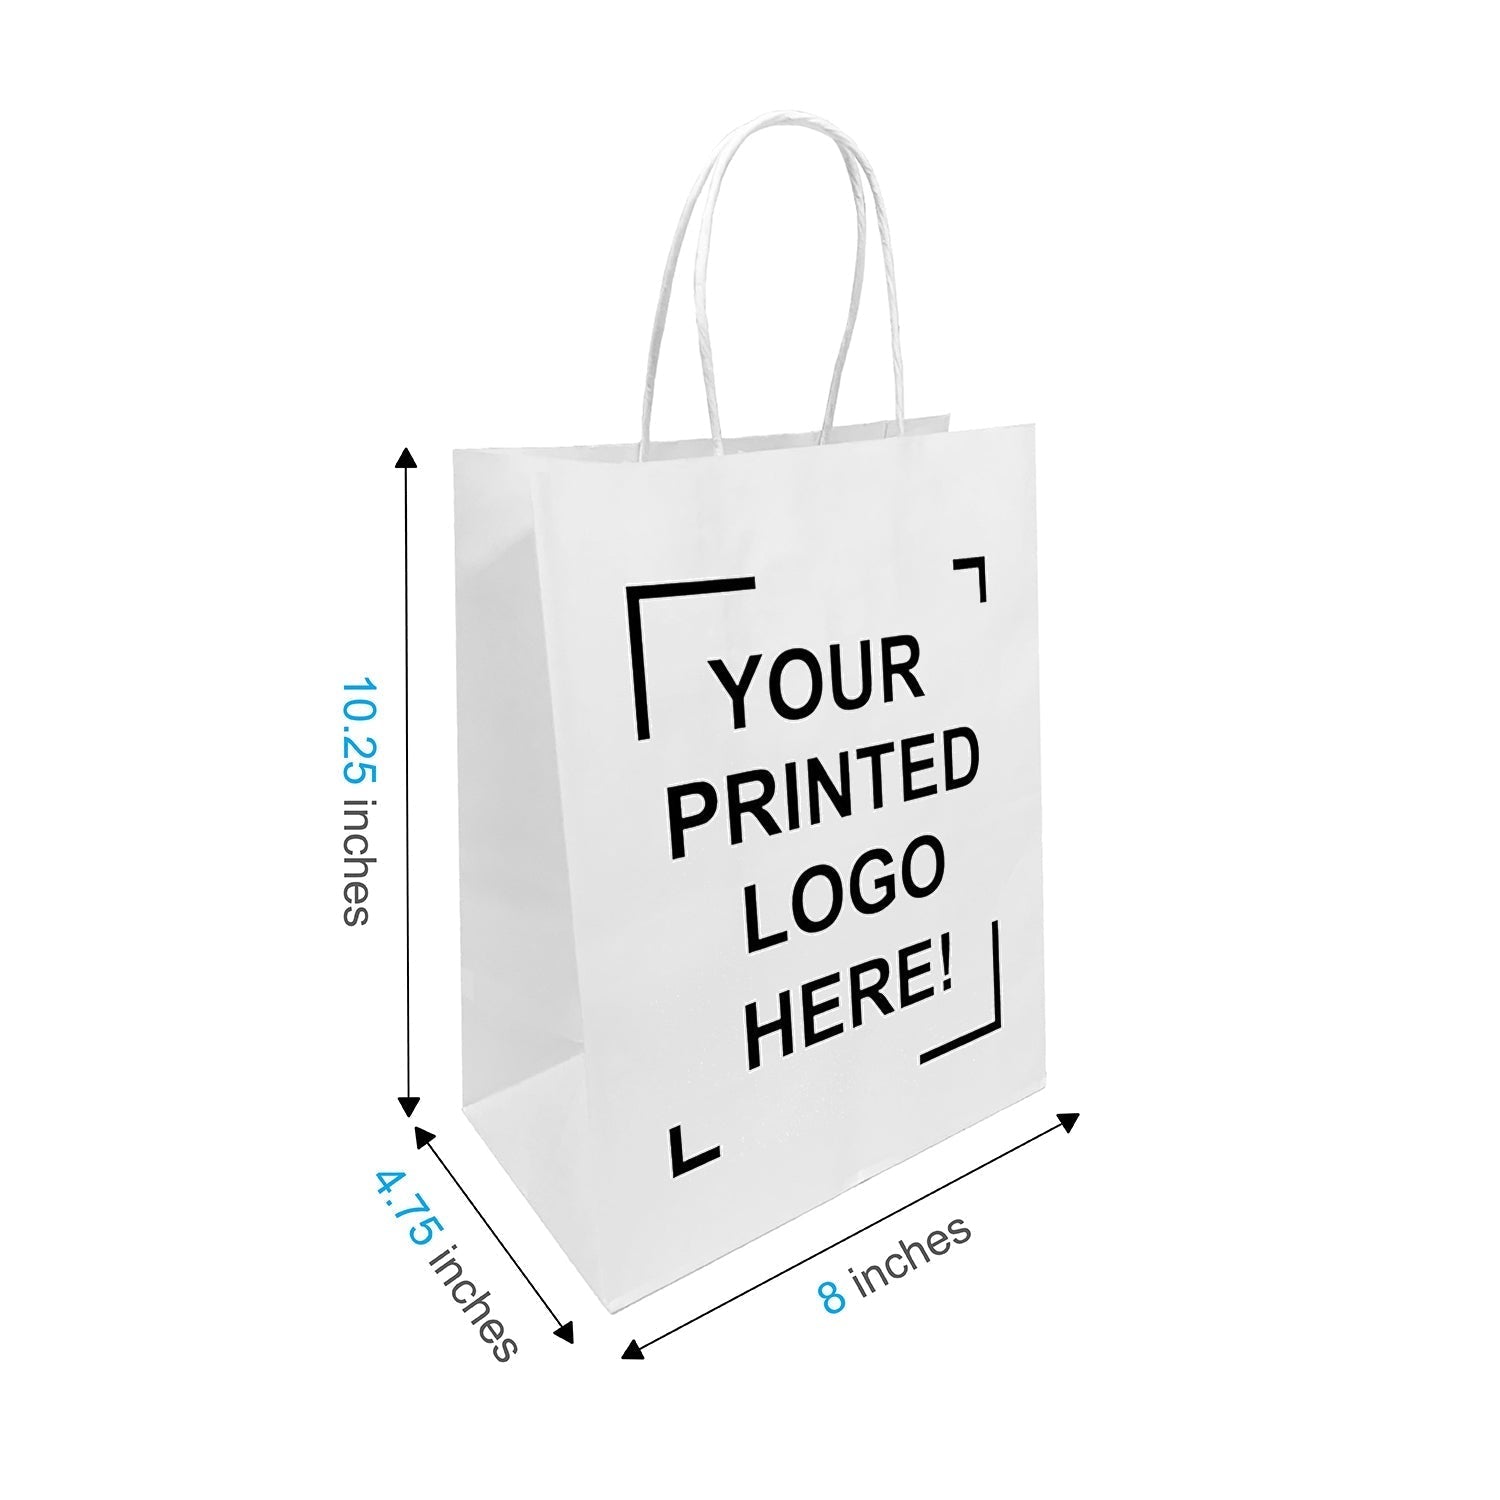 100 Pcs, Cub, 8.5x4.5x10.25 inches, Kraft Paper Bags, with Twisted Handle, Full Color Custom Print